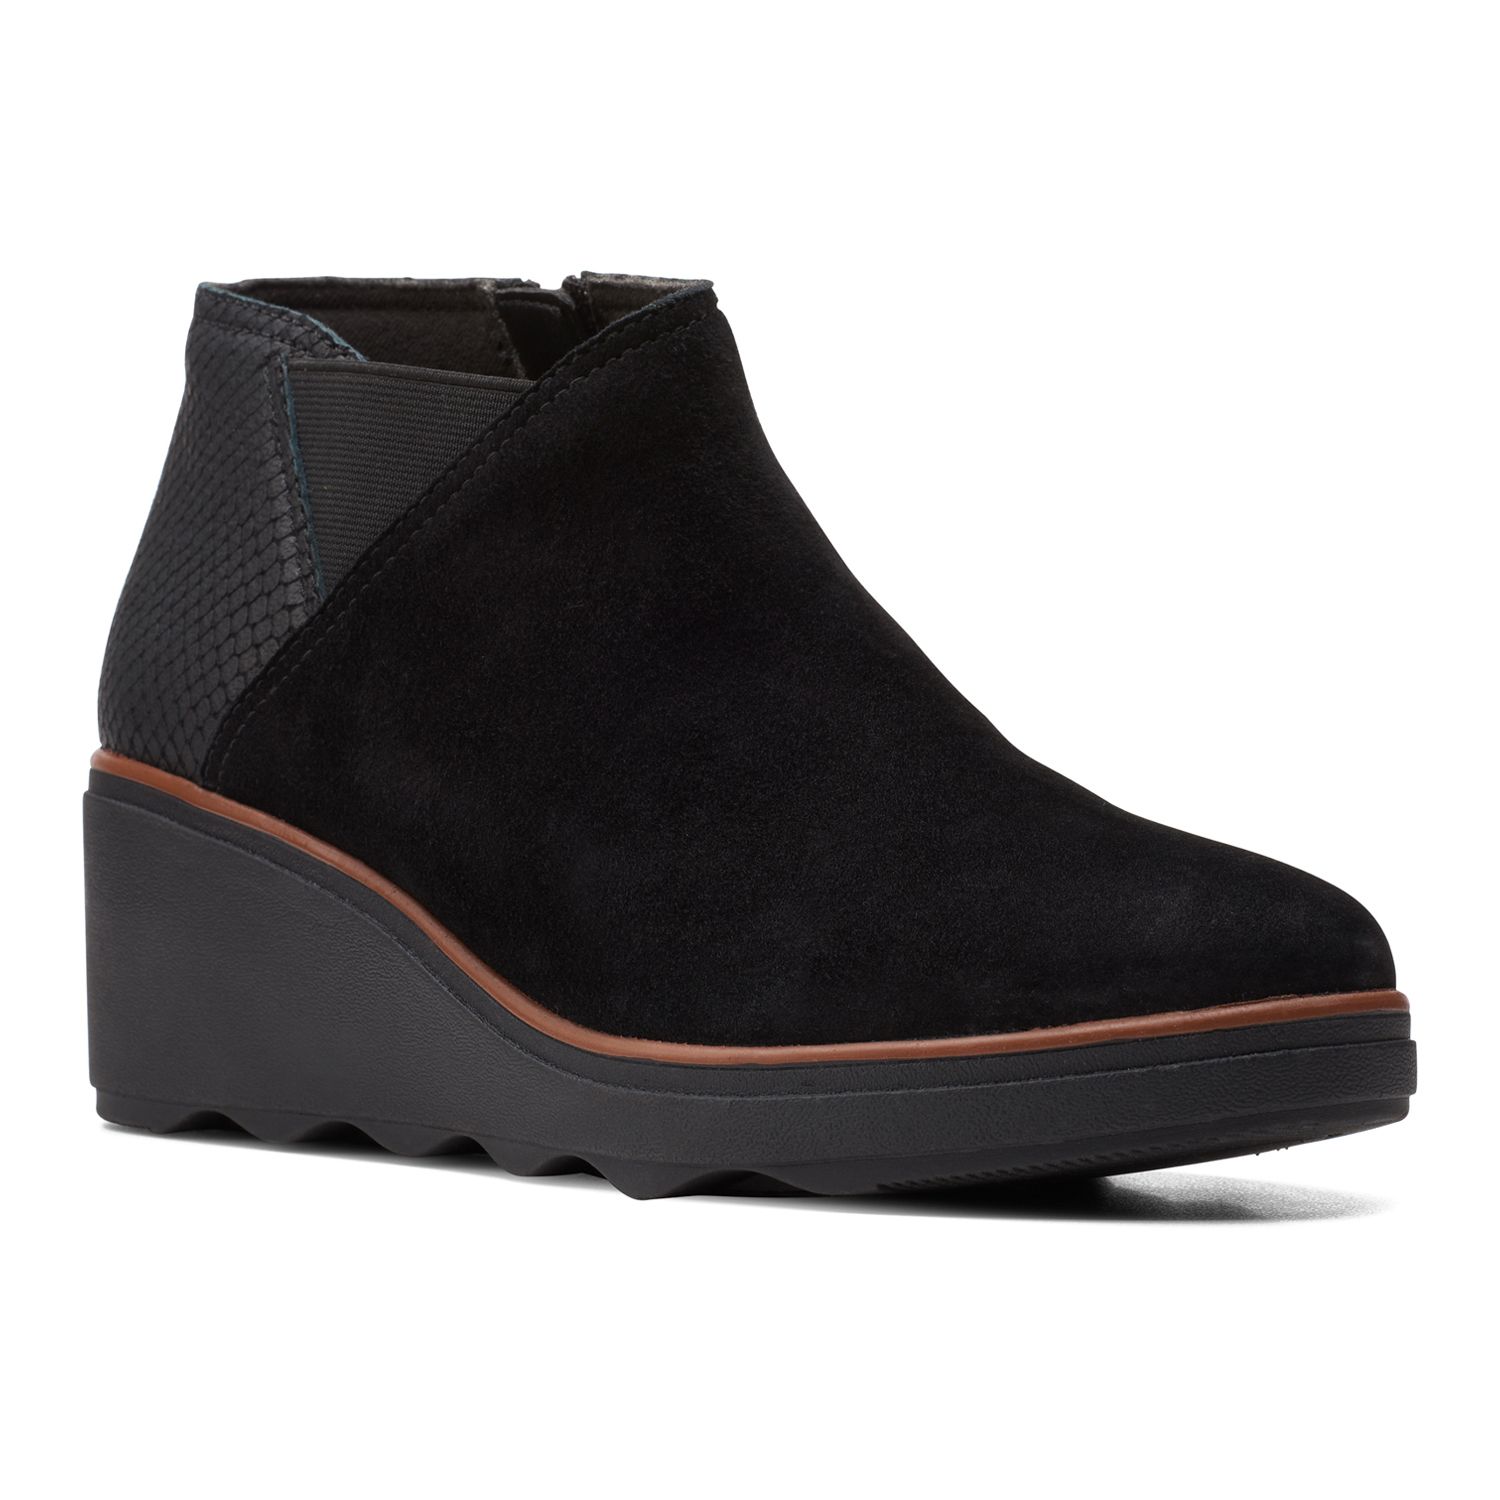 clarks black leather wedge ankle boots